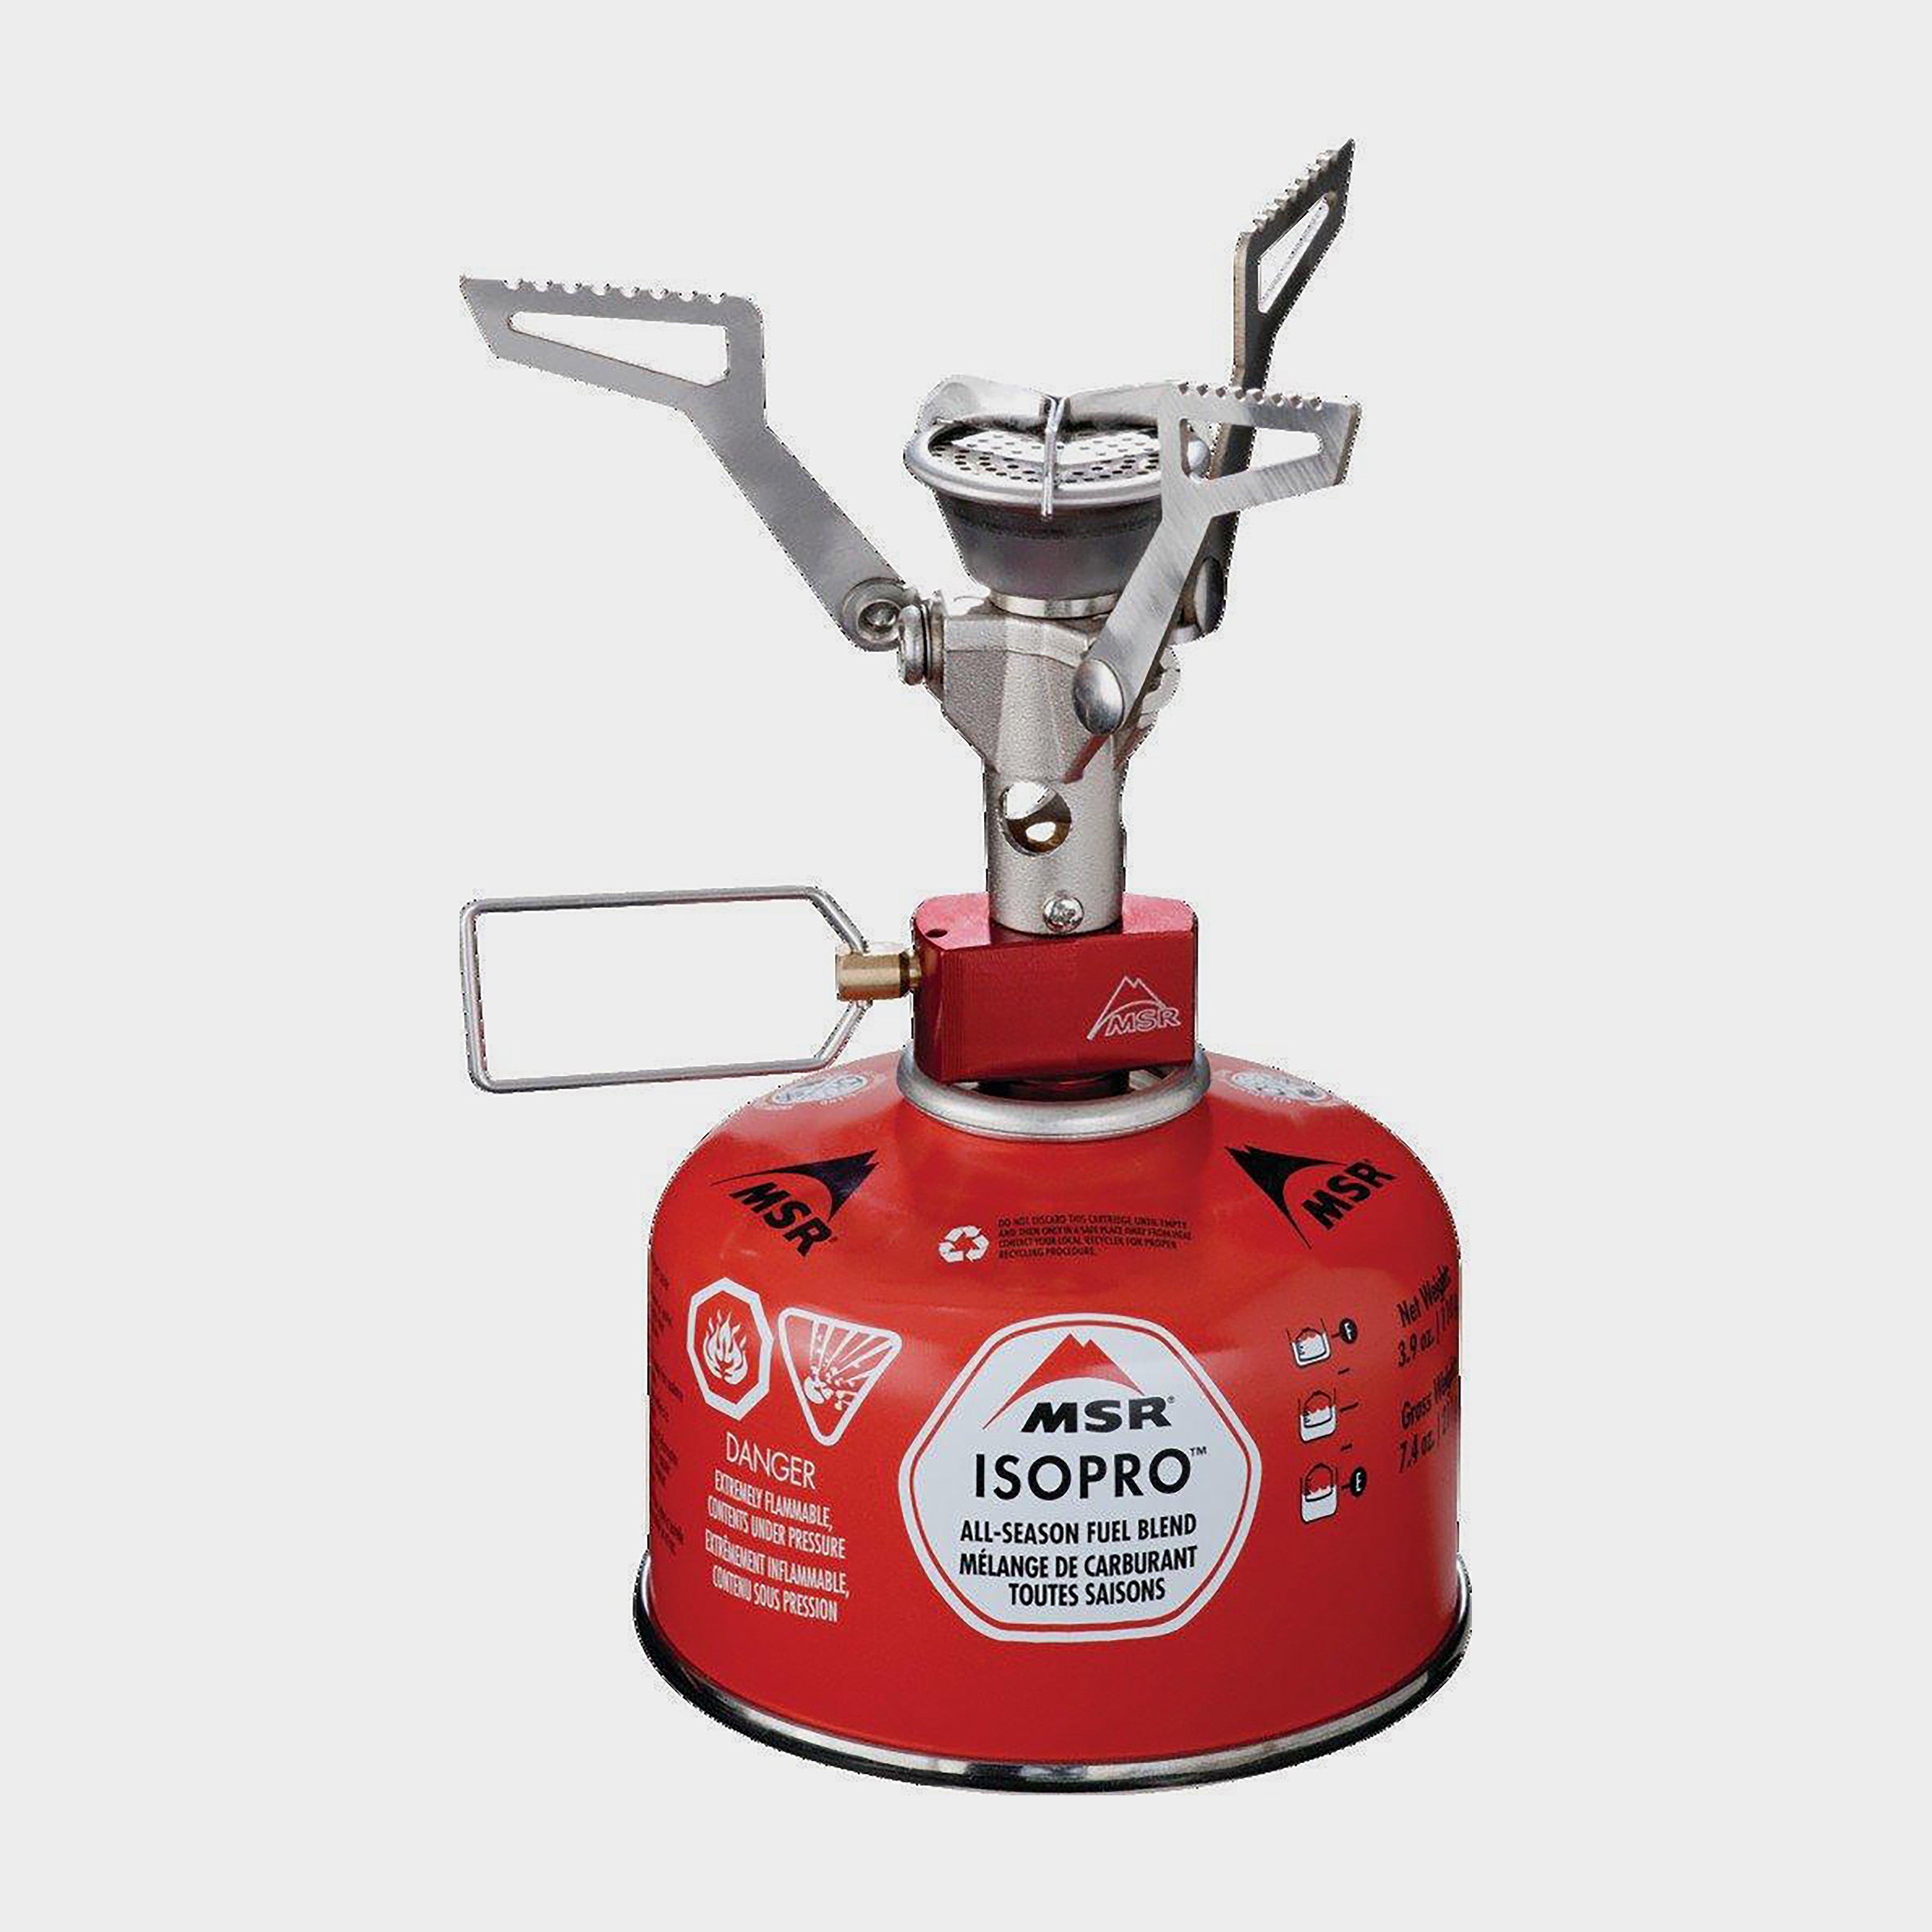 Msr Pocketrocket  Compact Stove - Red/red  Red/red